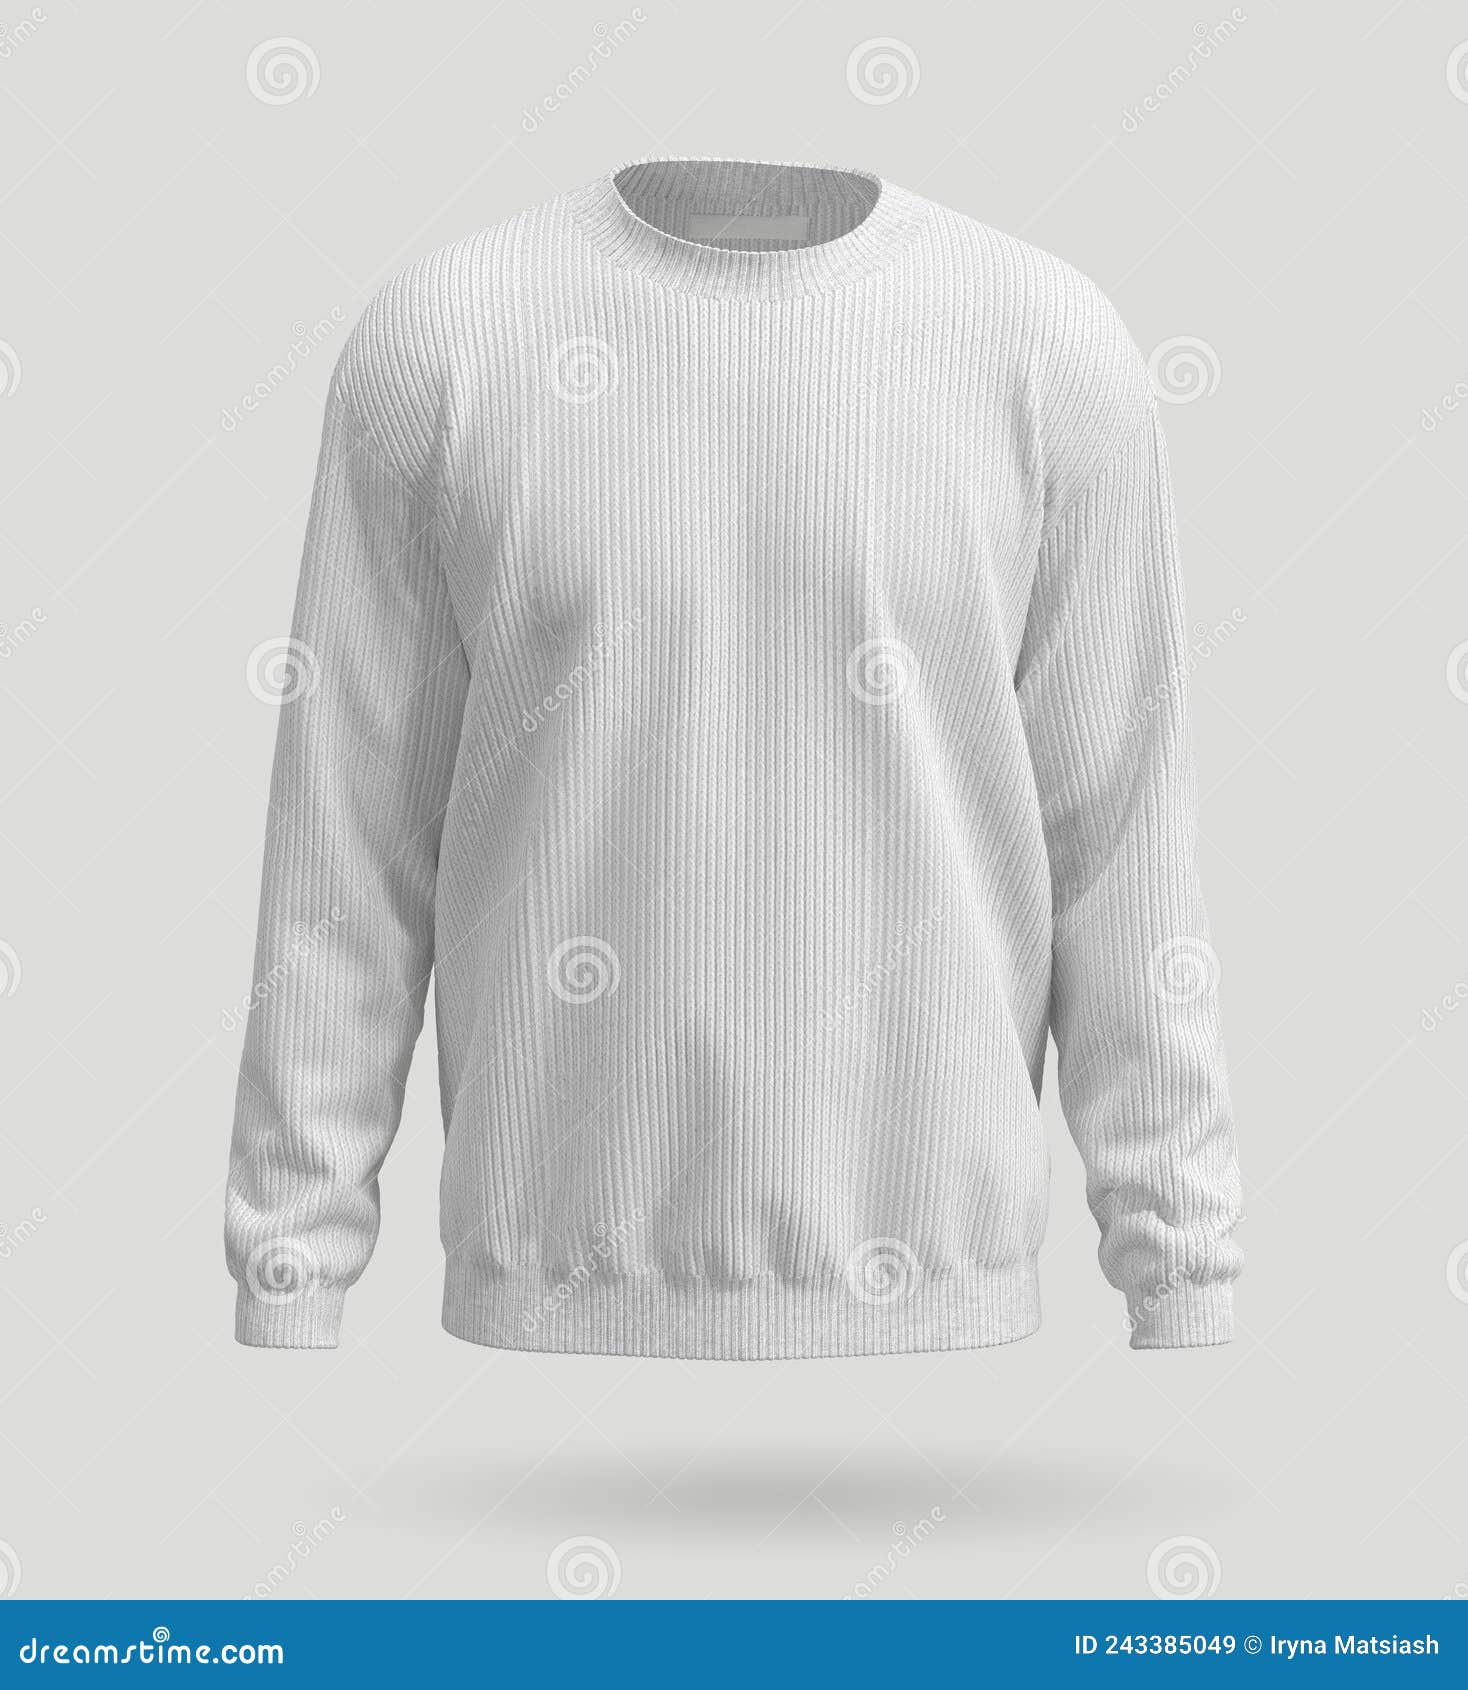 Blank Template Mens White Knitted Sweater, Front View. 3d Rendering ...